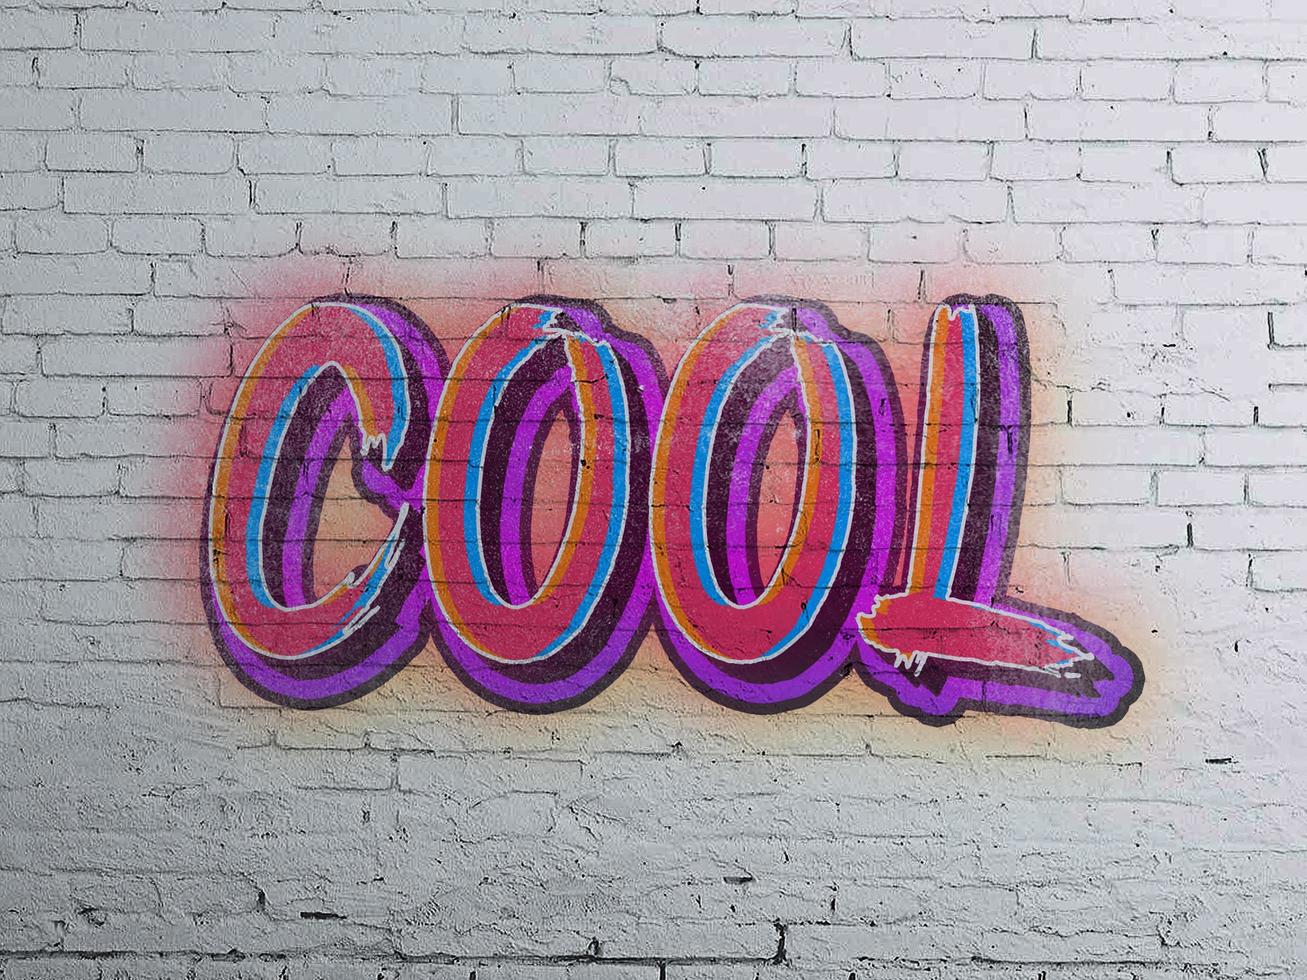 Cool concept image painted on a brick wall photo